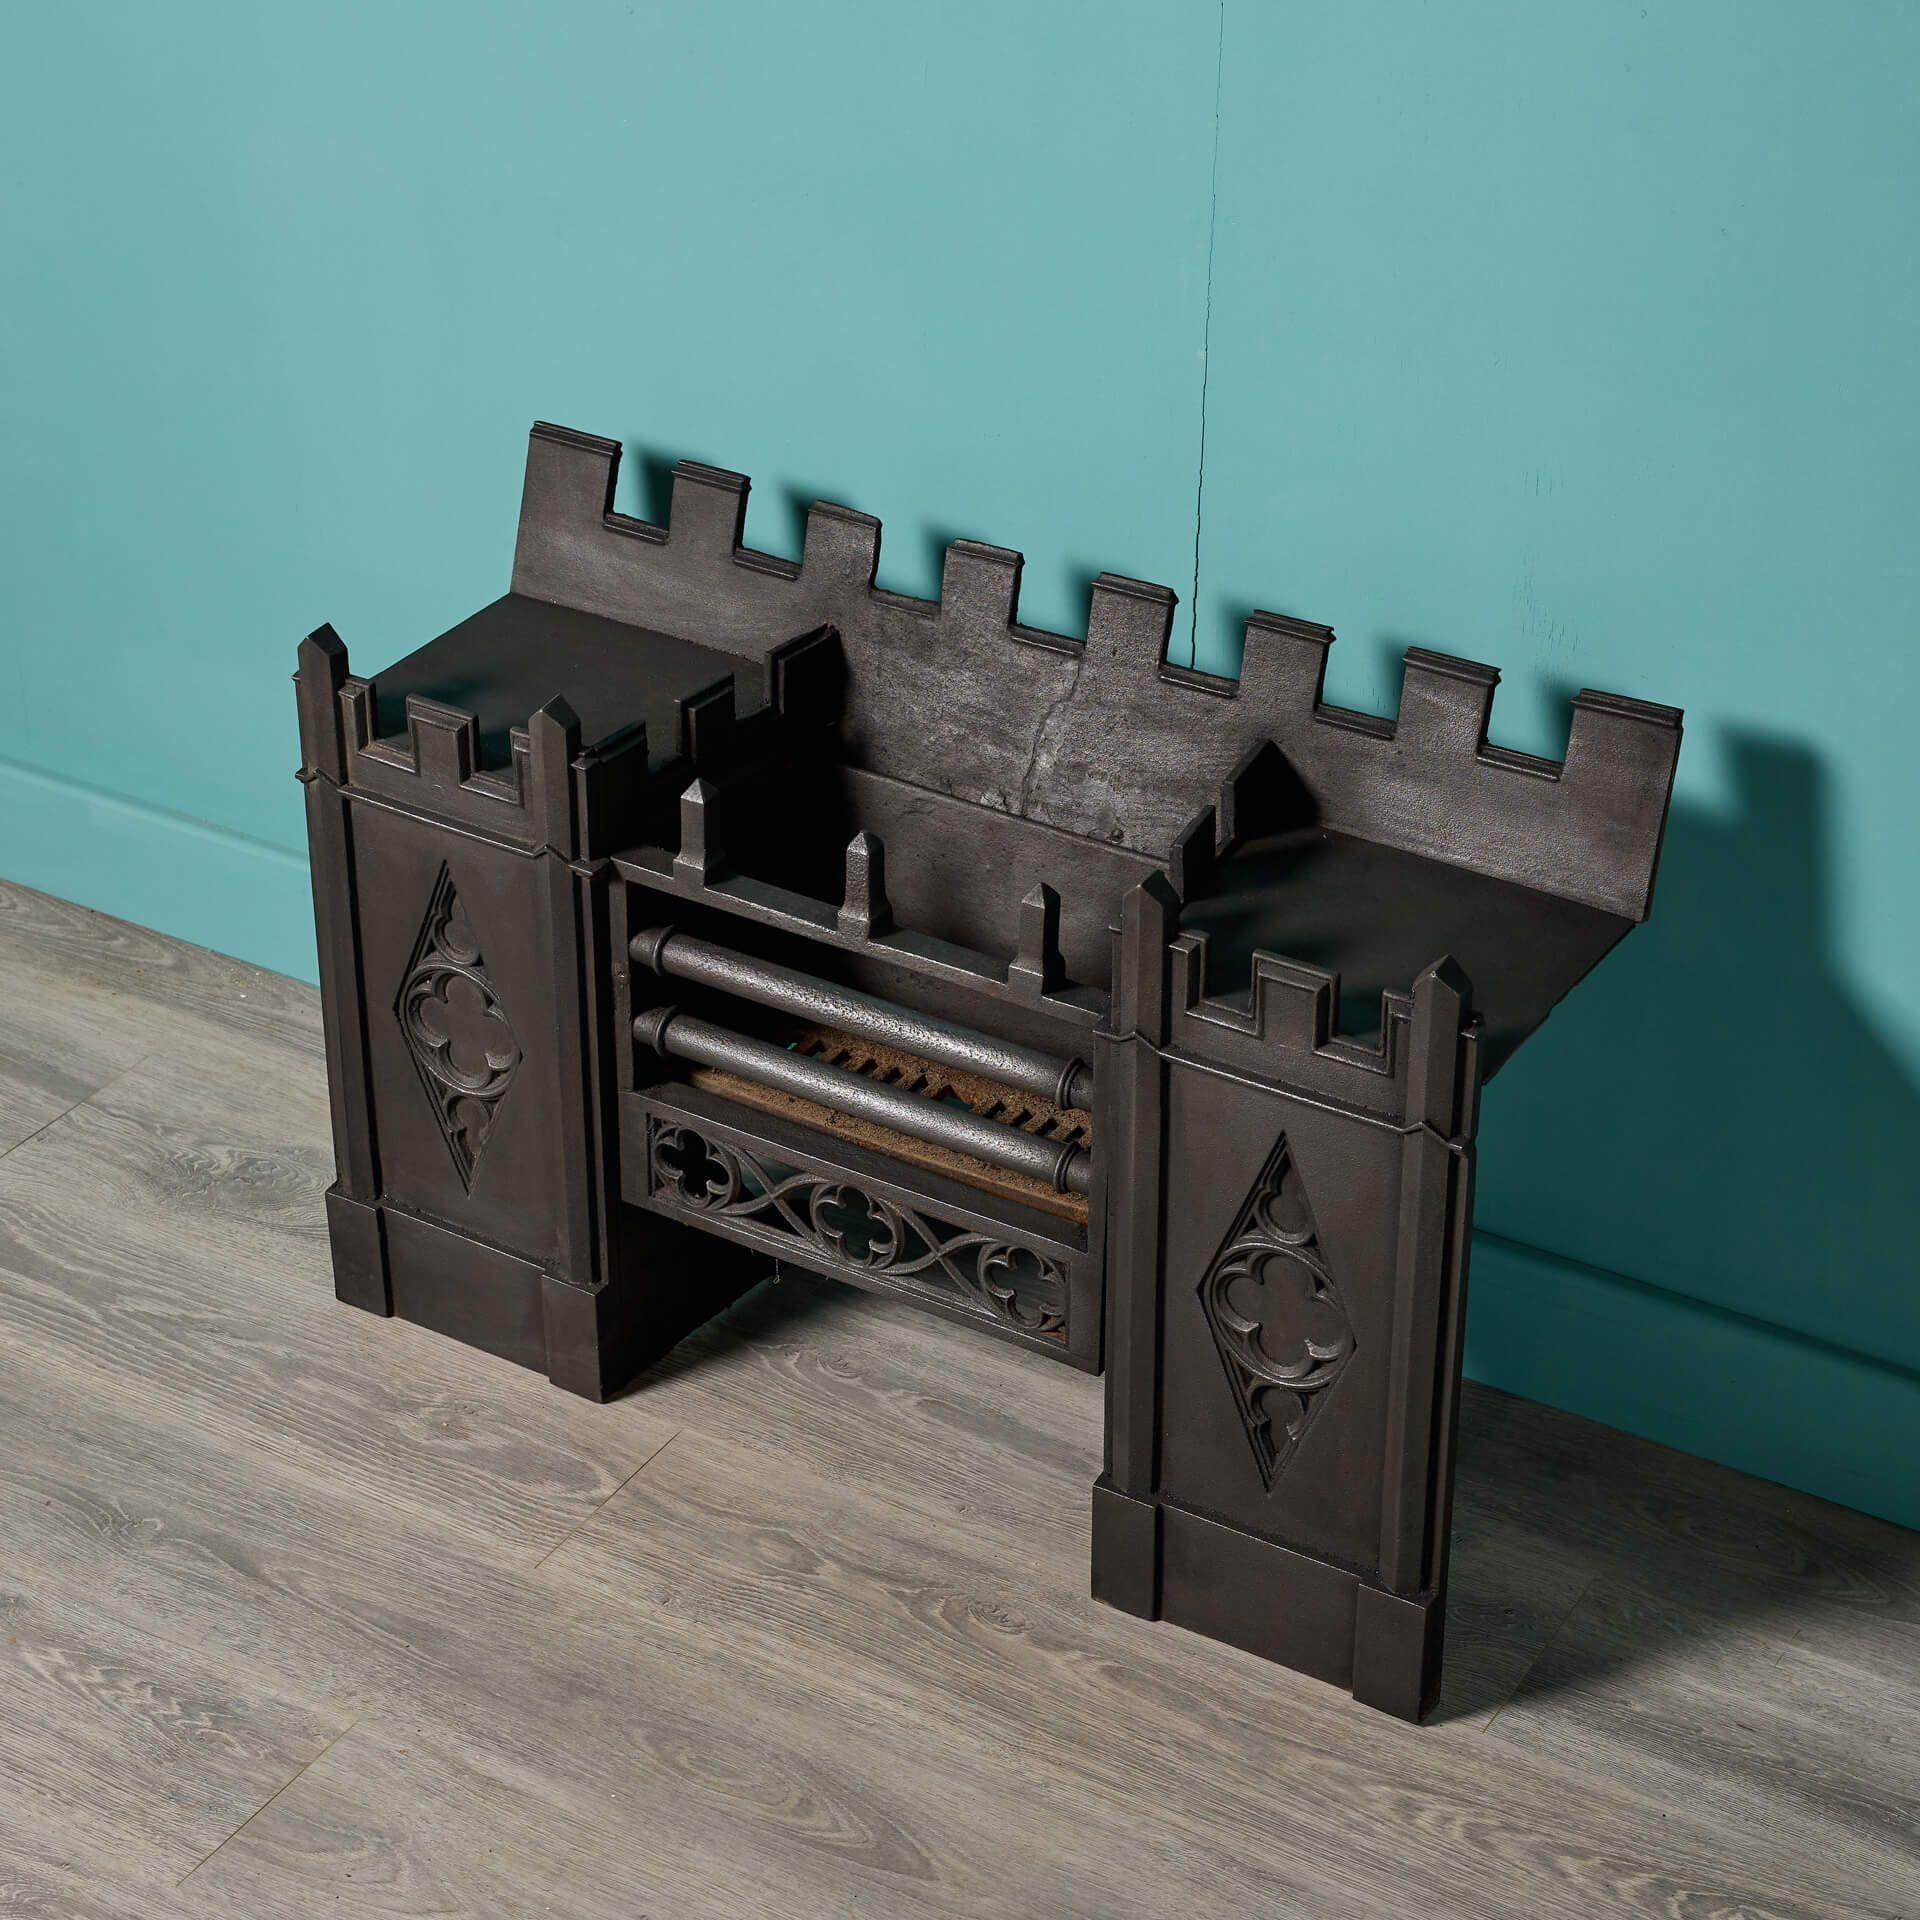 English Antique Gothic Style Hob Grate For Sale